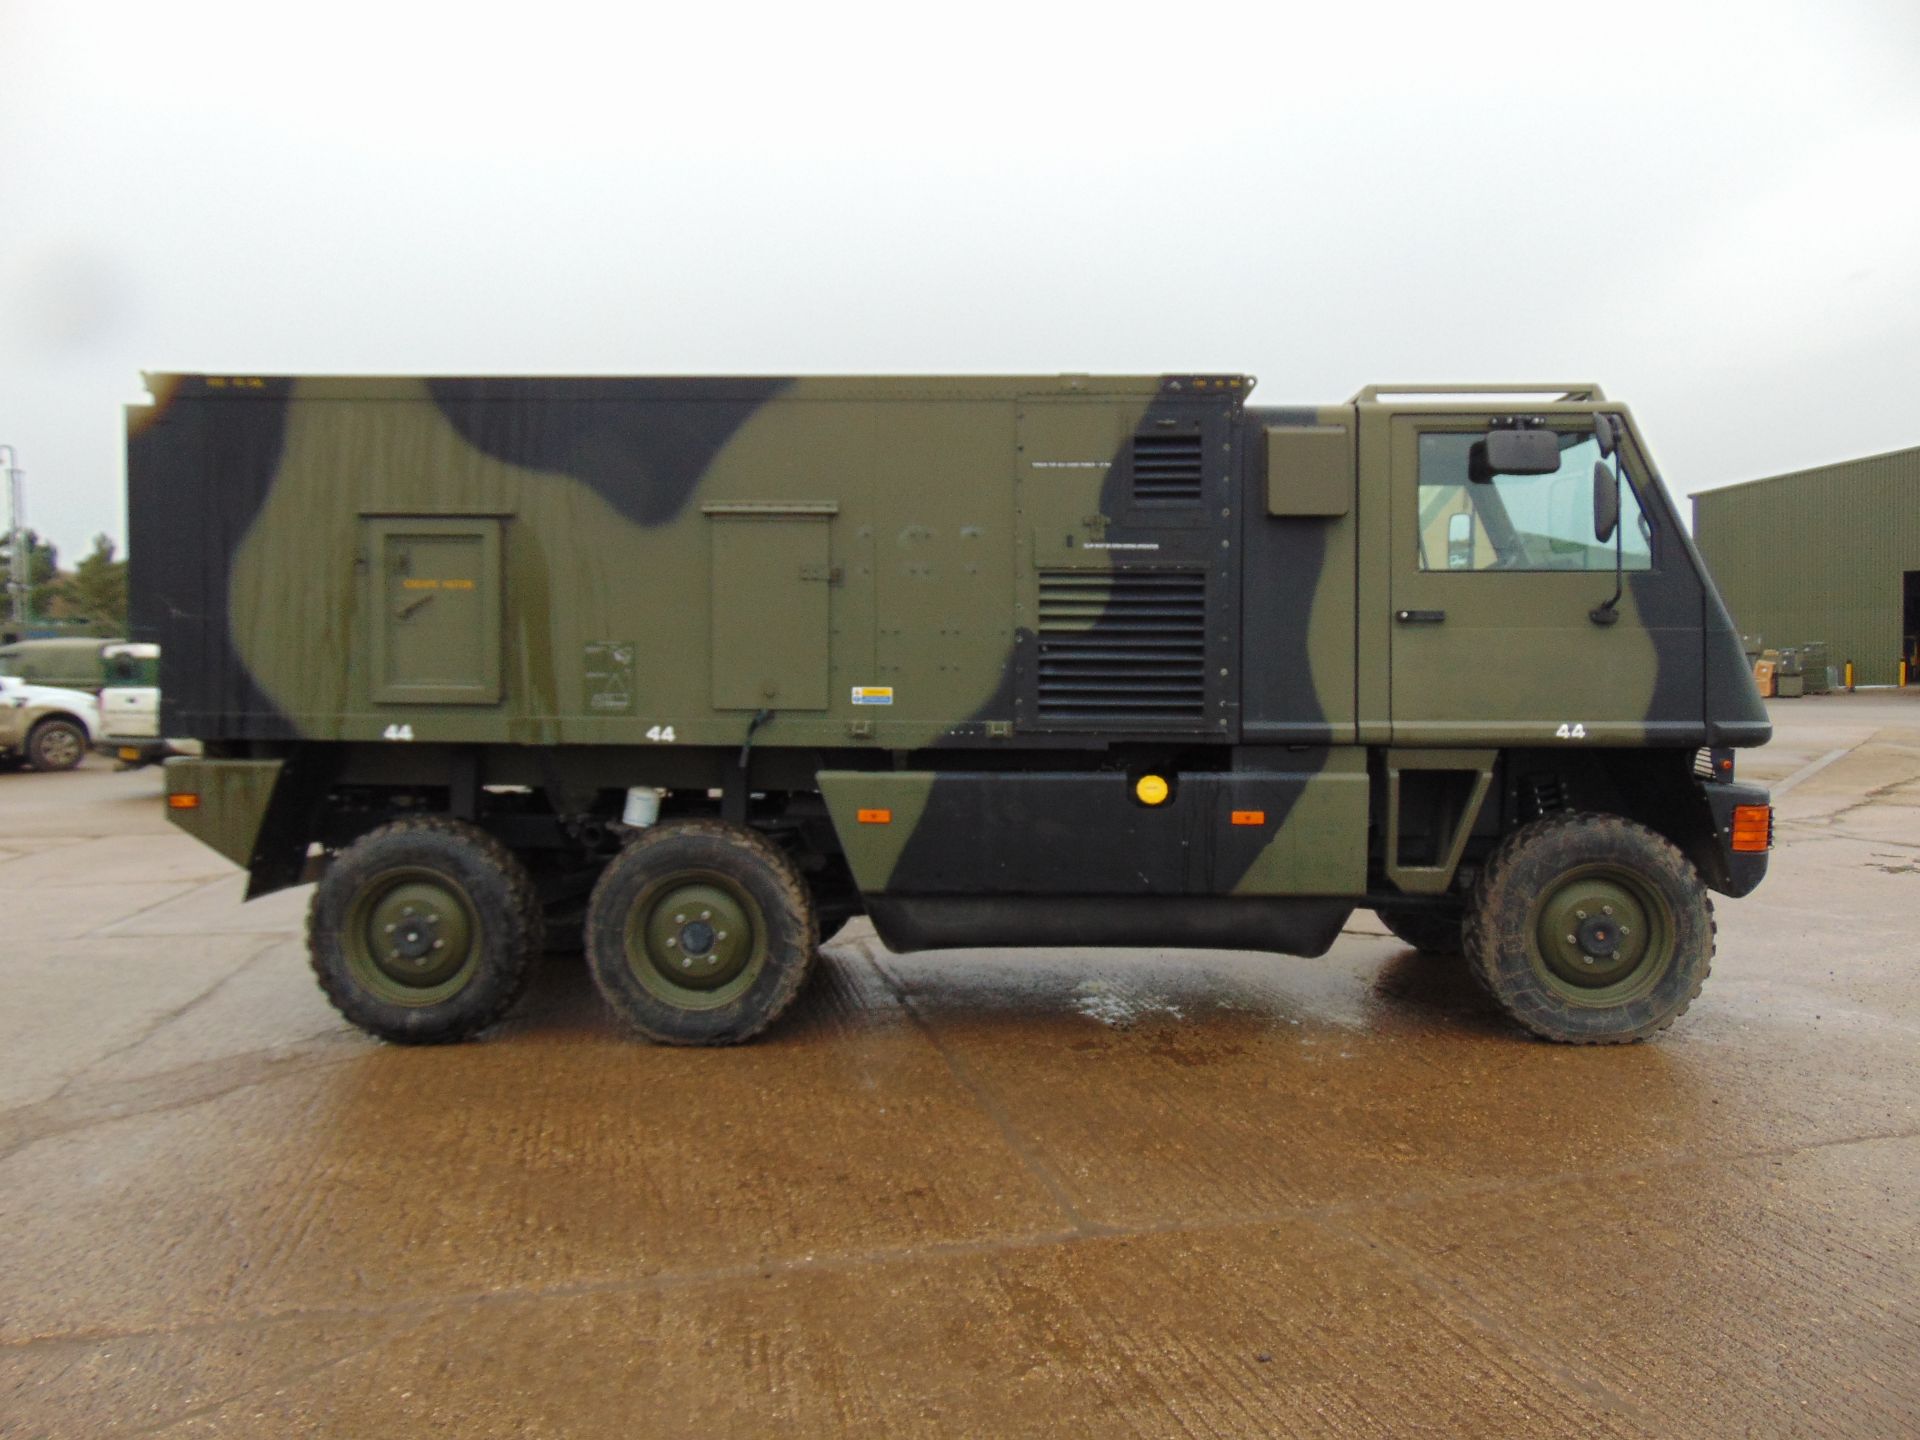 Ex Reserve Left Hand Drive Mowag Bucher Duro II 6x6 High-Mobility Tactical Vehicle - Image 5 of 17